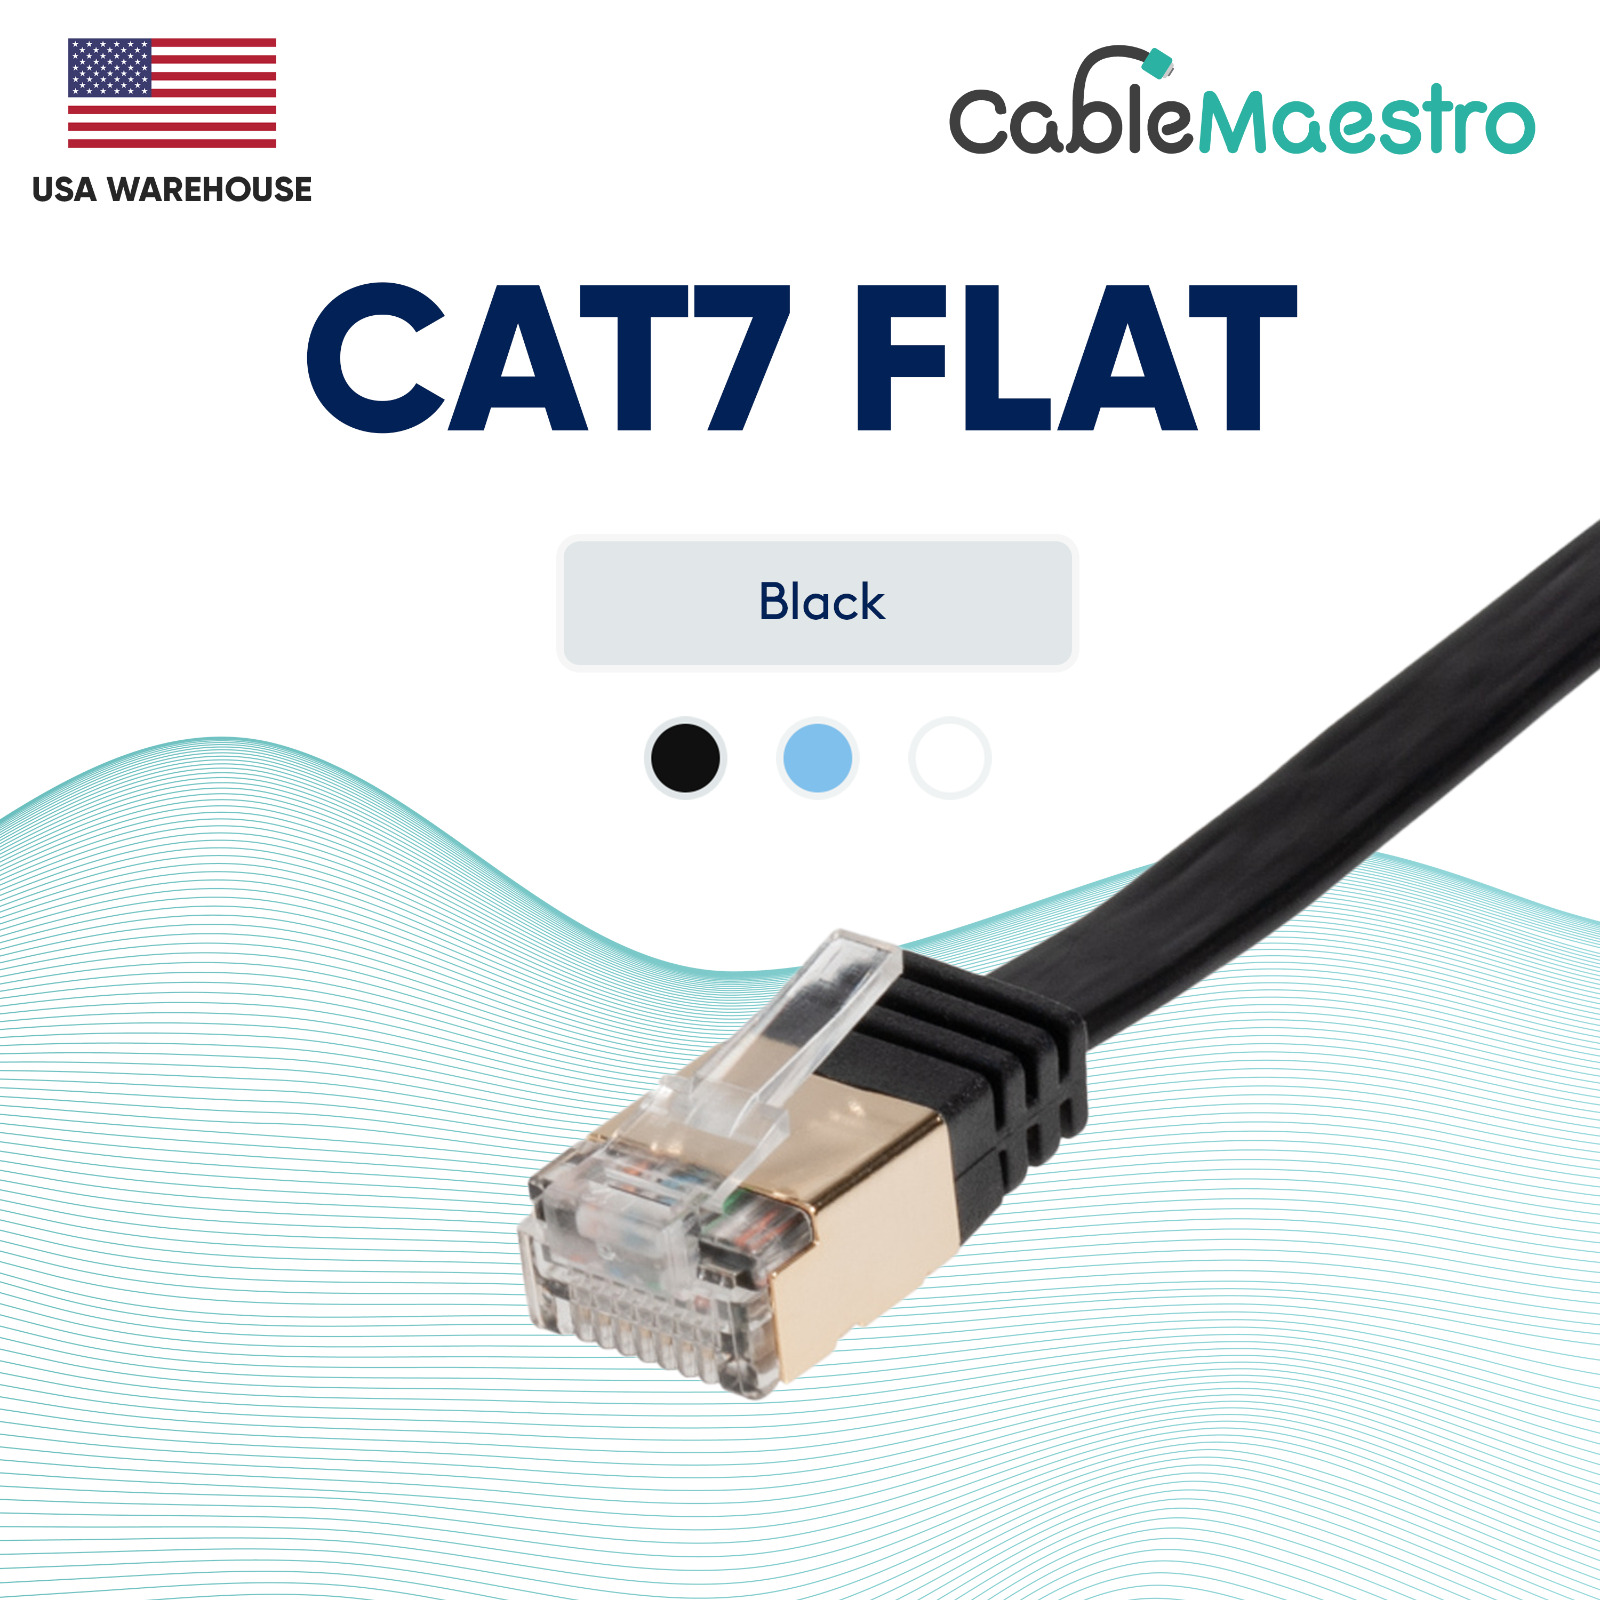 CAT7 Ethernet Cable Patch FLAT LAN Gold Plated U/FTP Shielded RJ45 6-100FT Lot